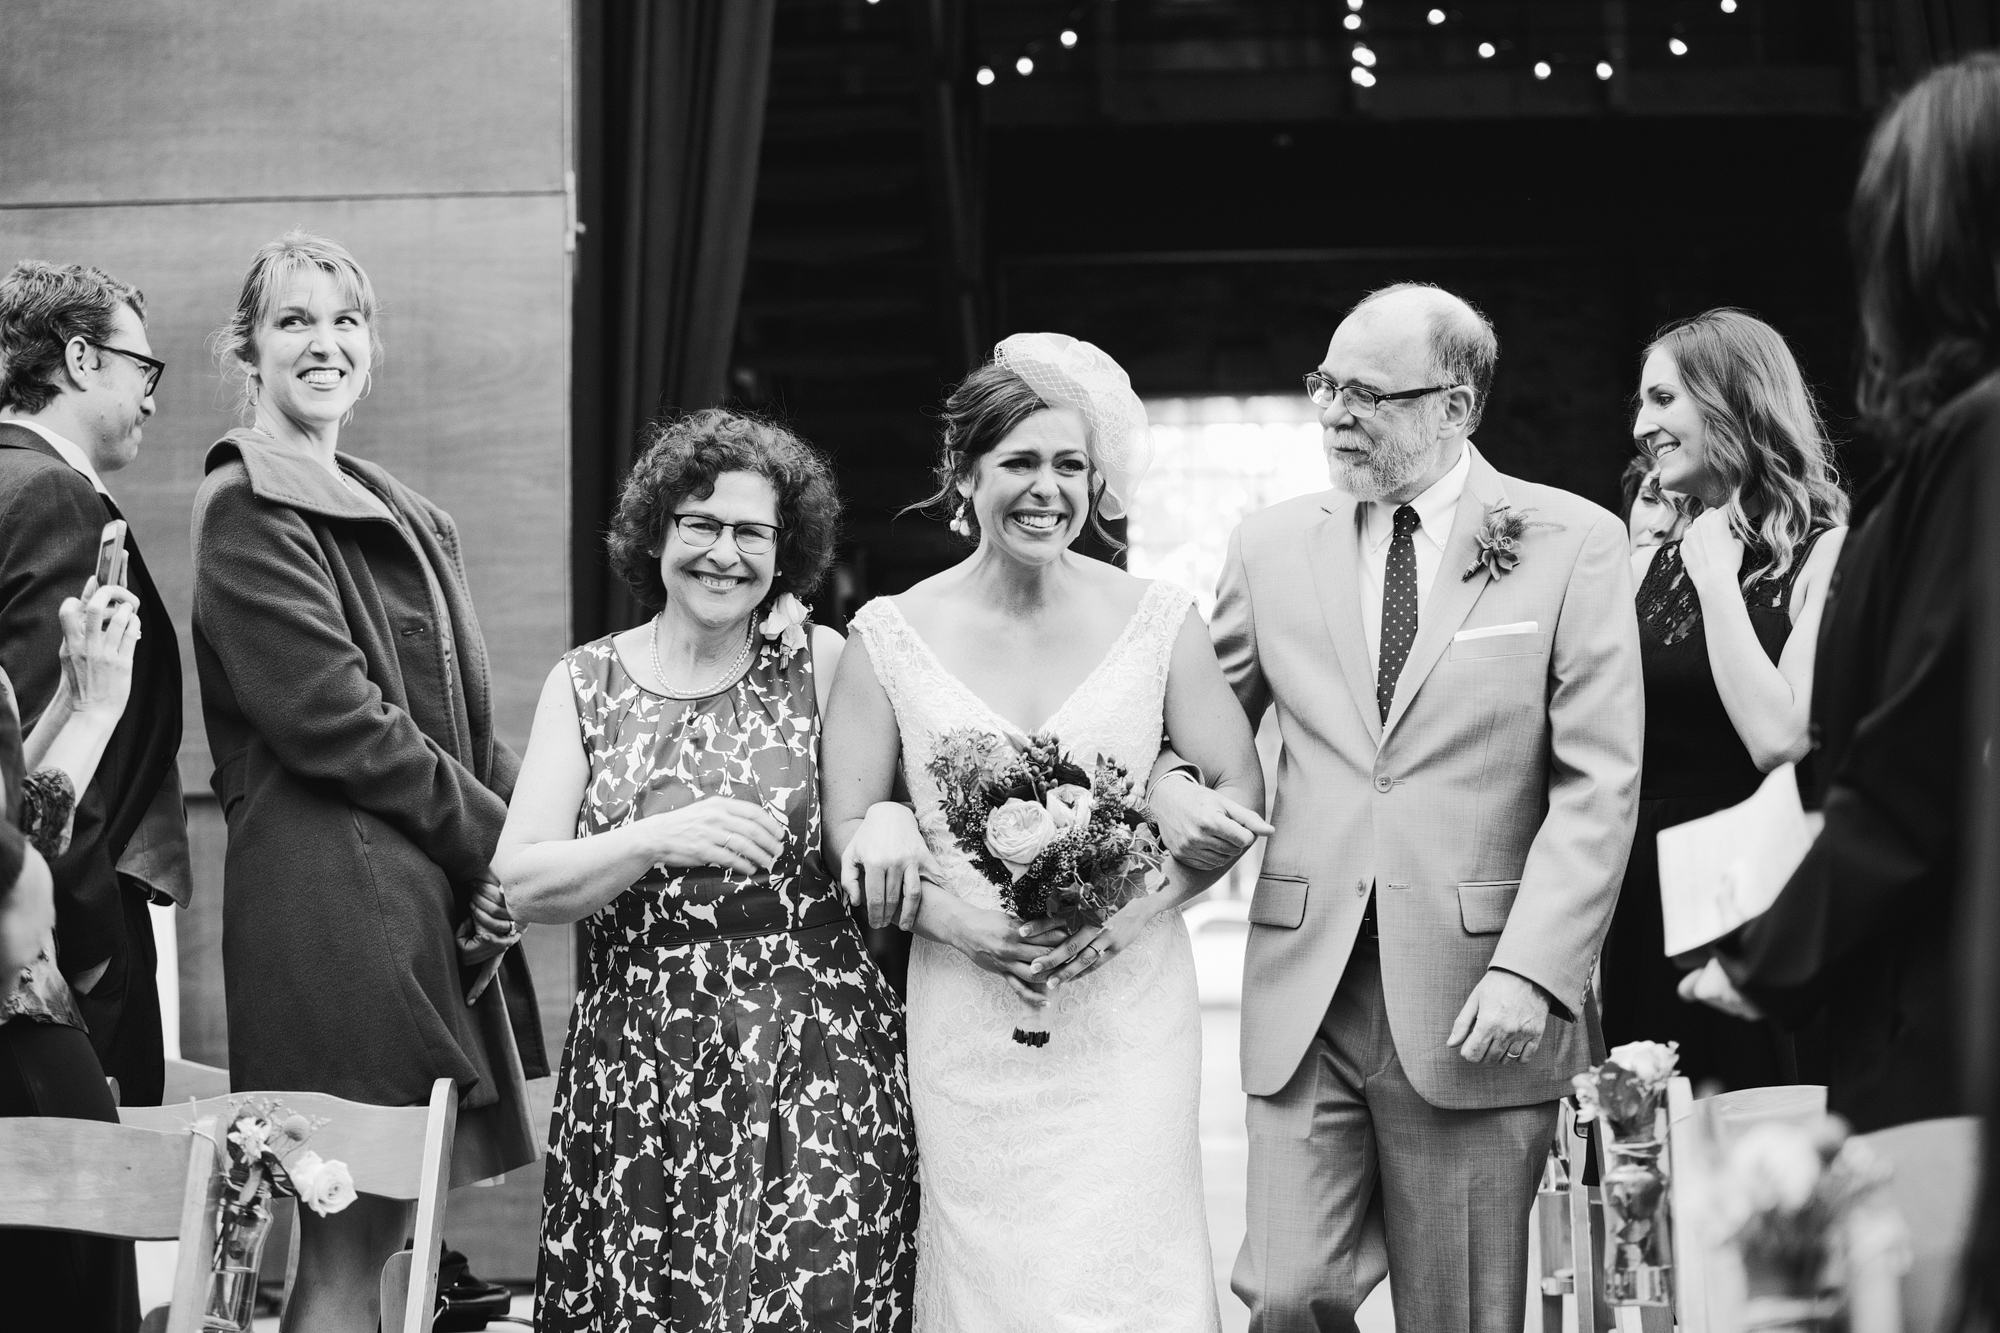 This is a photo of Rachel walking down the aisle with her parents. What a precious moment!